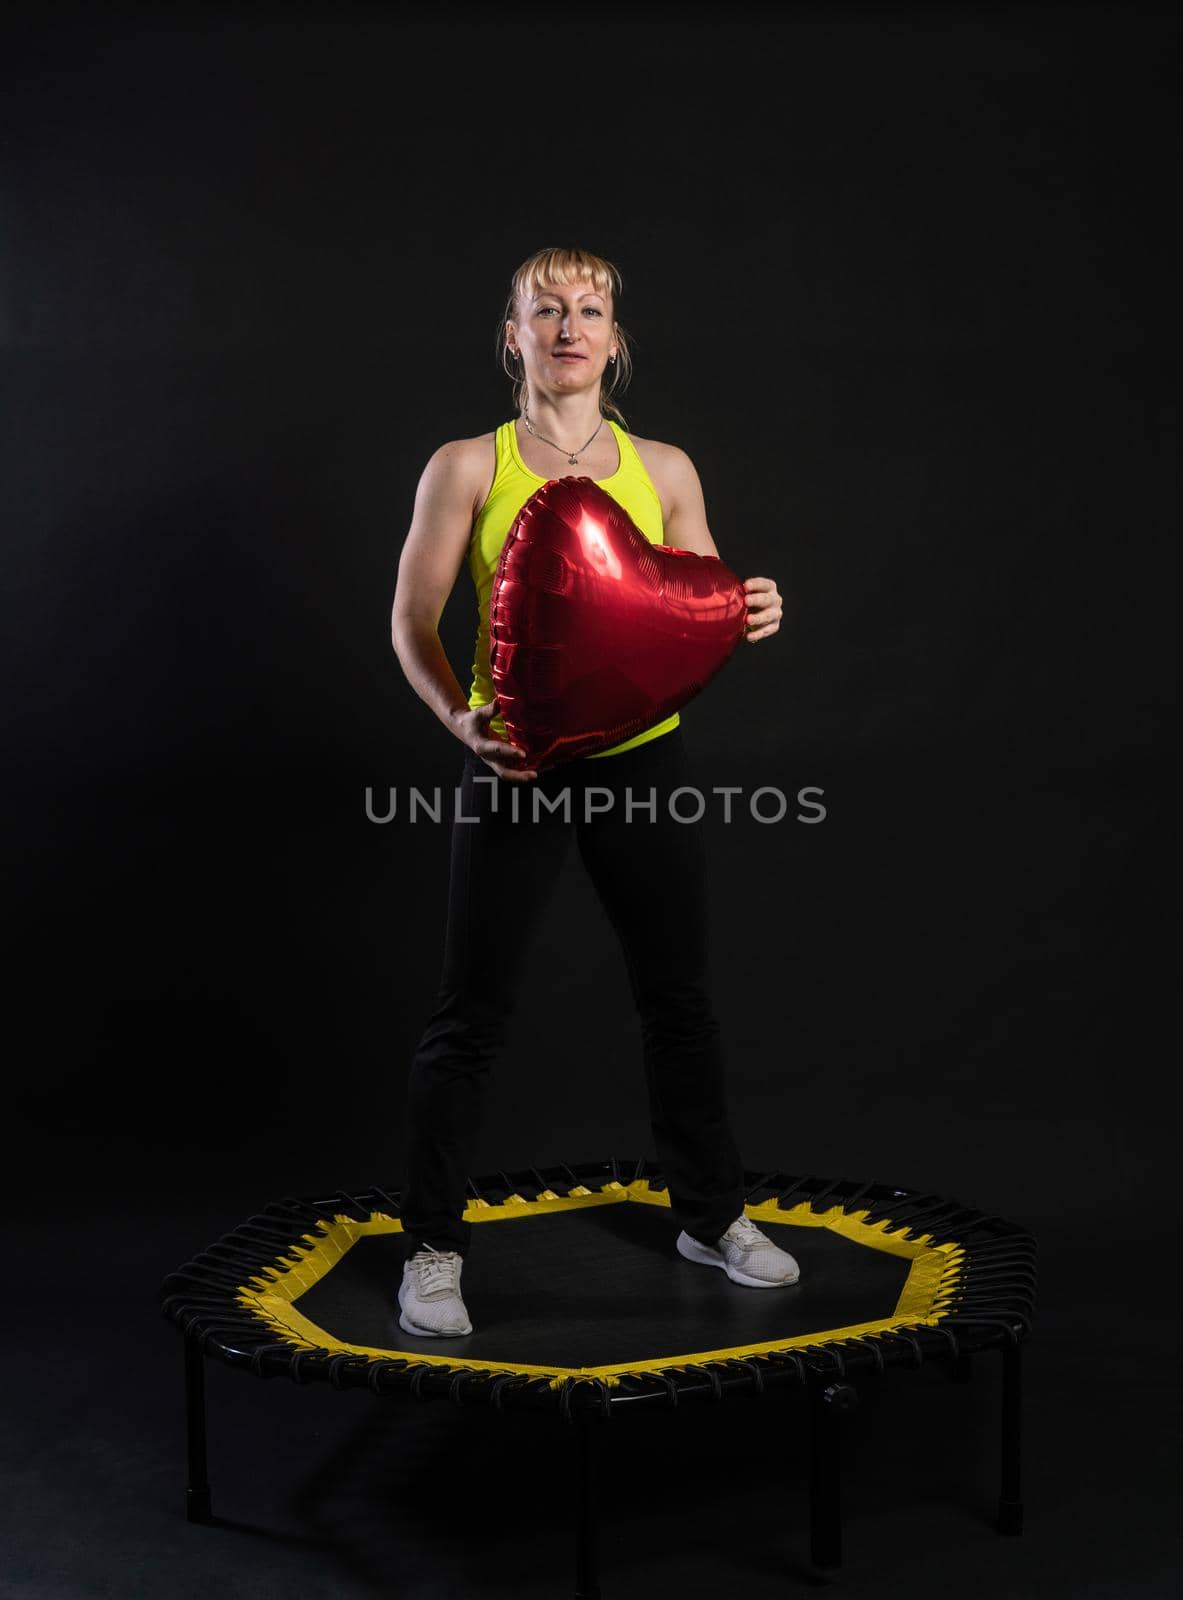 Girl on a fitness trampoline on a black background in a yellow t-shirt trampoline energy active training healthy cardio, weight club. Wellness white sportswear muscle instructor enjoy